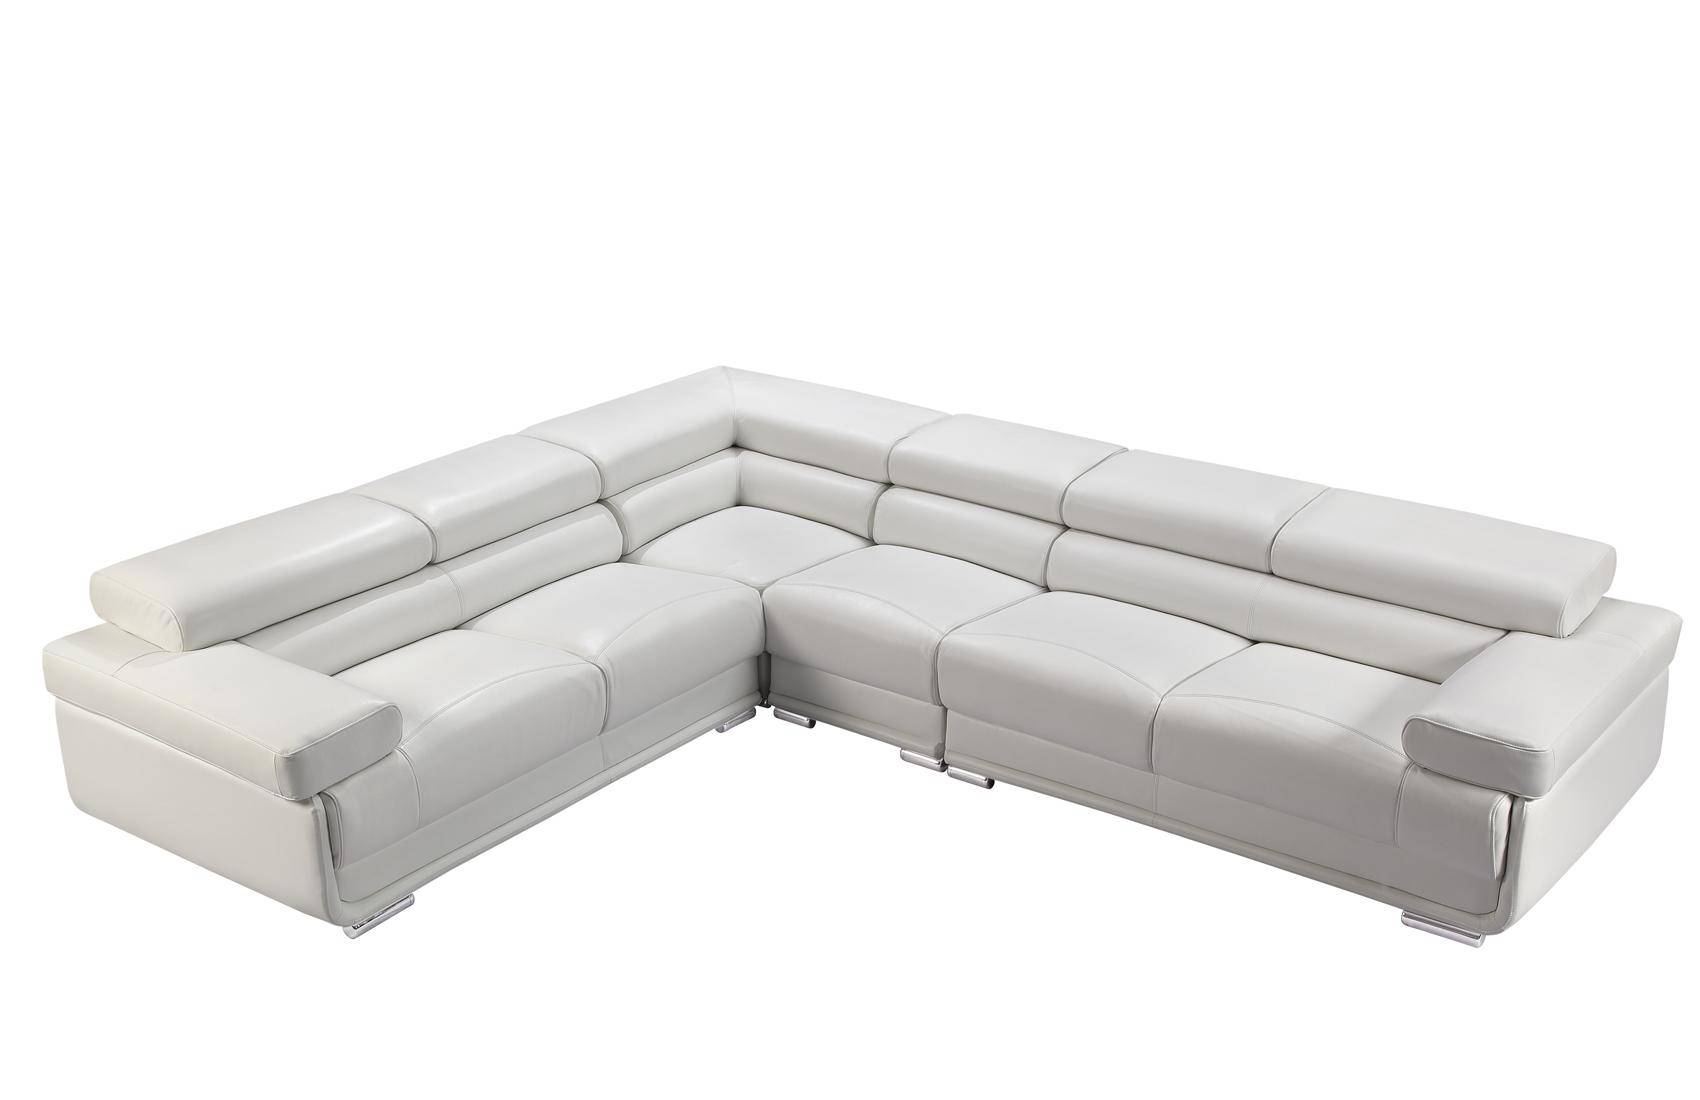 Esf 2119 Sectional Sofa In White, White Leather Sectional Couch